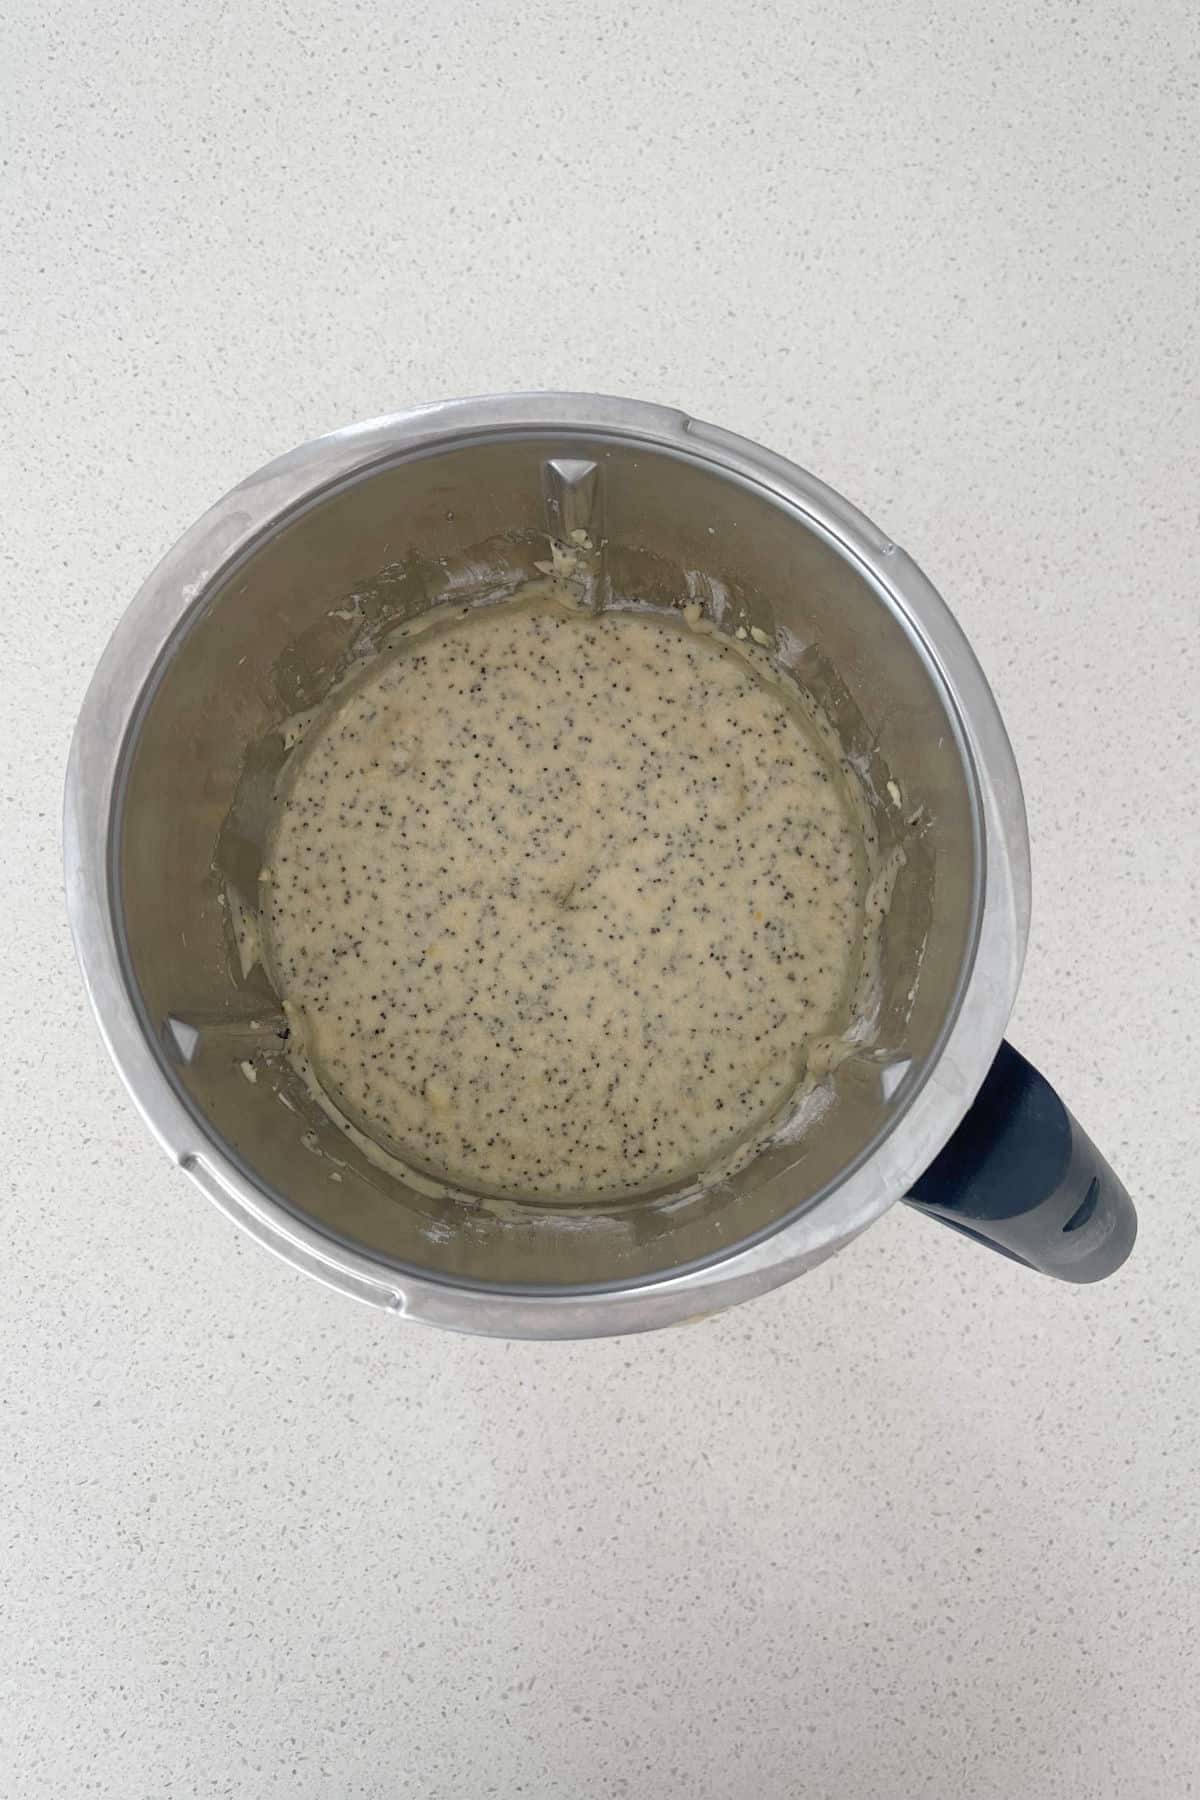 Lemon and Poppy Seed Cake ingredients in a thermomix bowl.